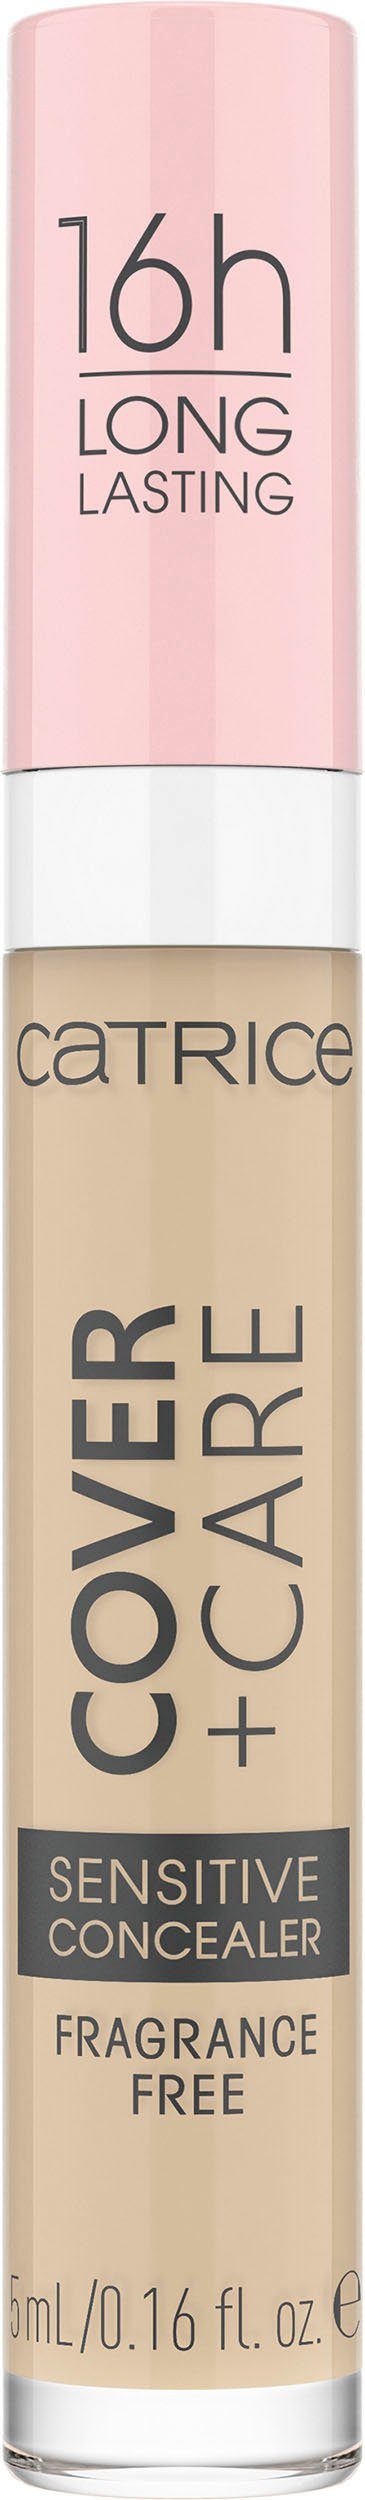 Catrice Concealer, Sensitive + Care Catrice Cover Concealer